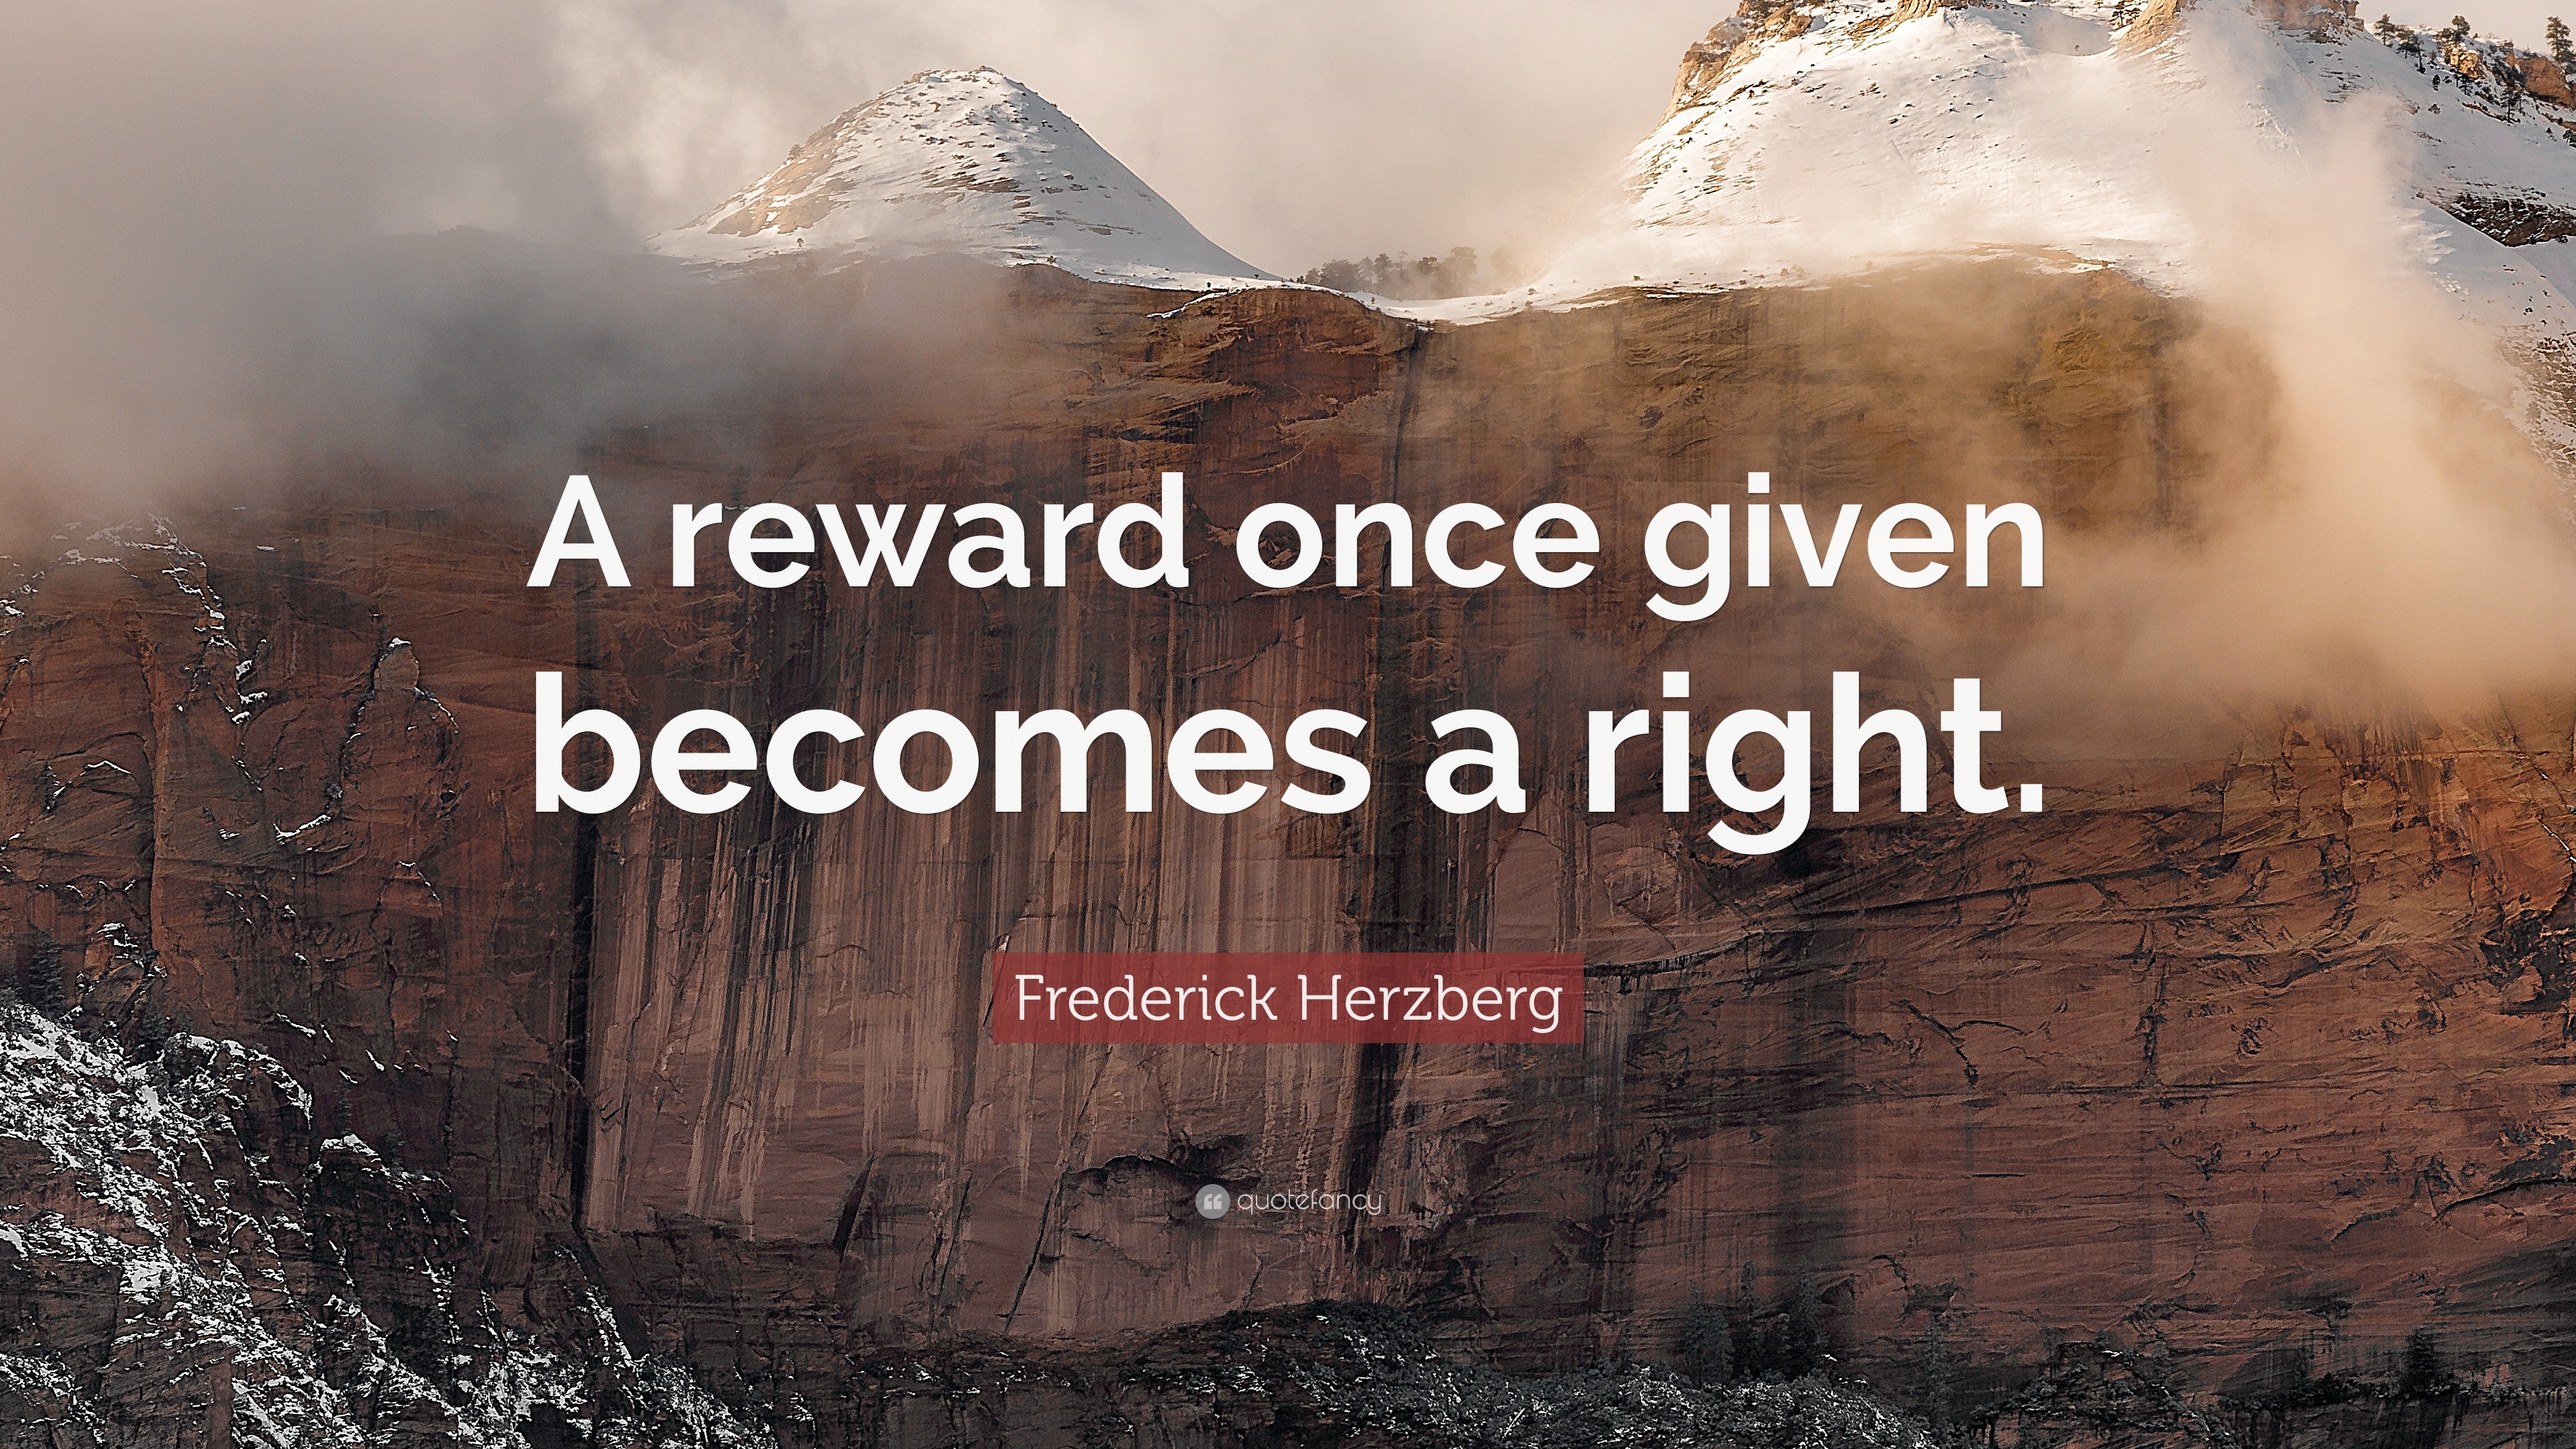 Frederick Herzberg Quote: “A reward once given becomes a right.” (10